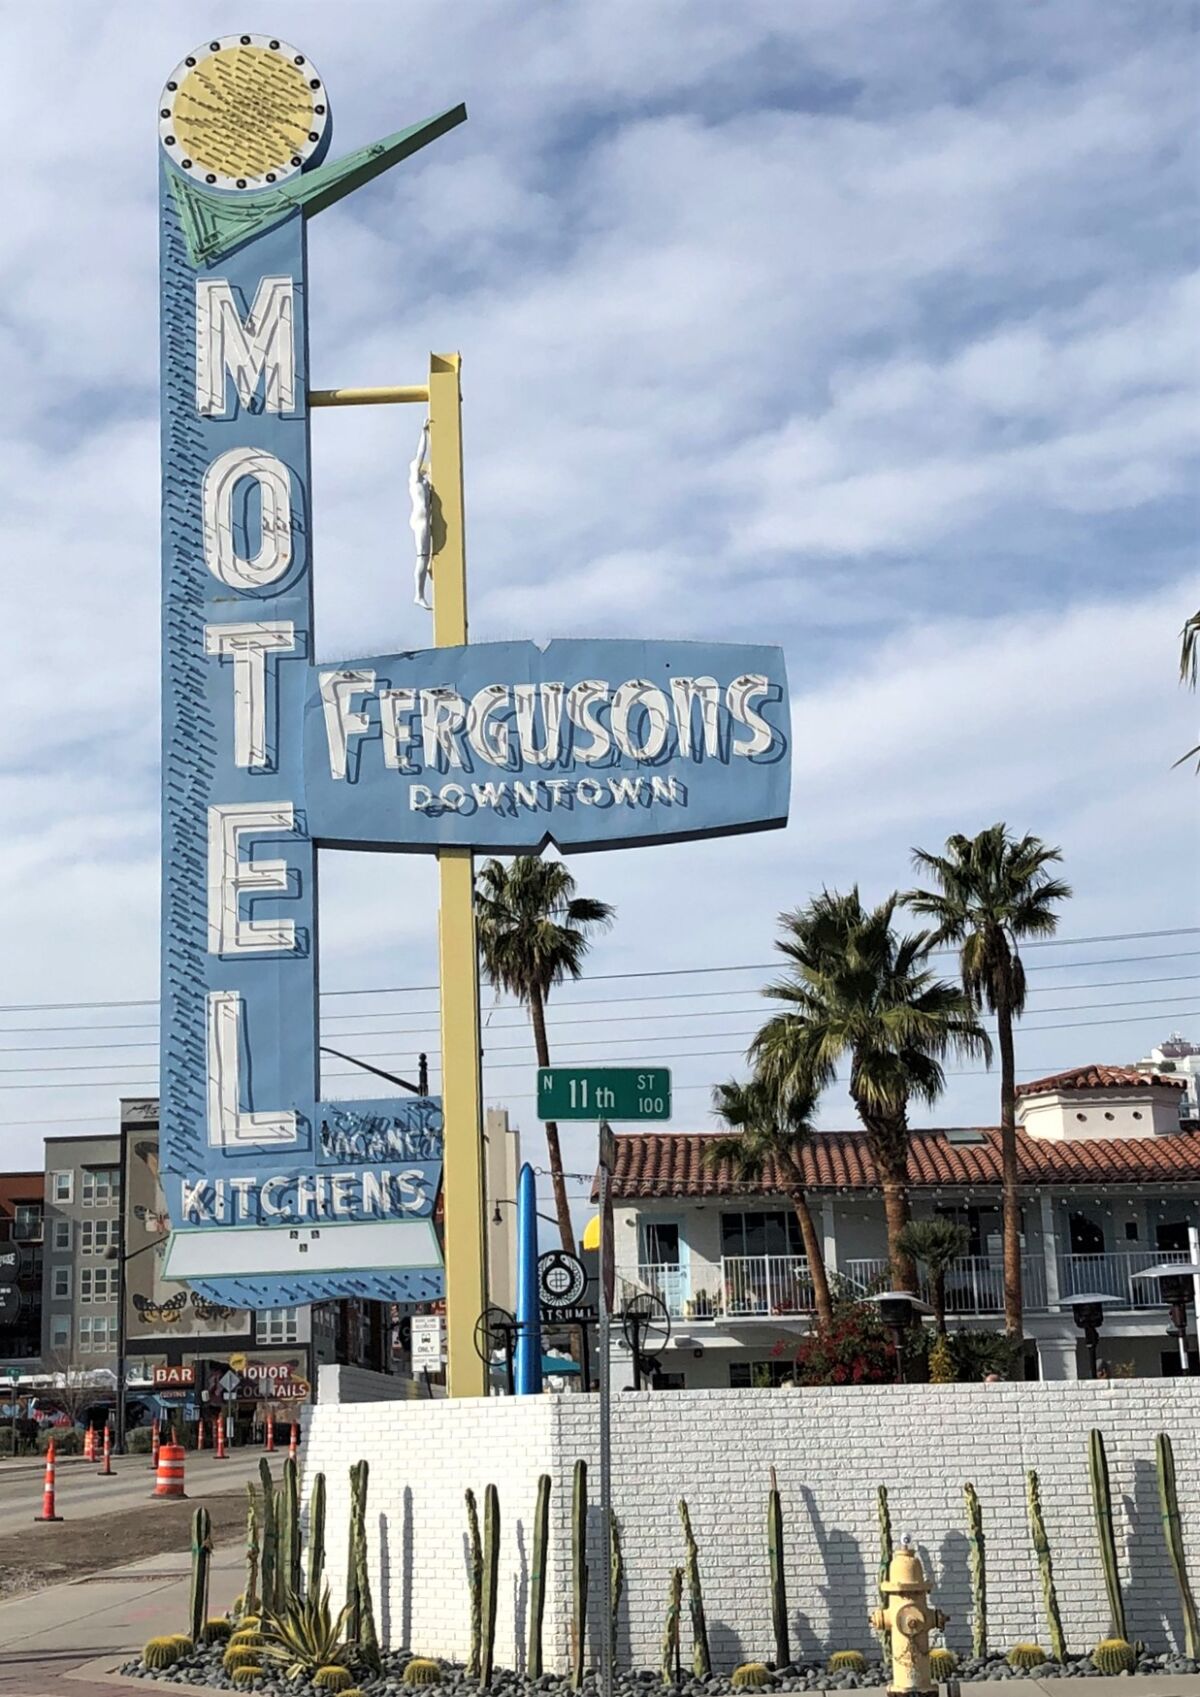 Fergusons Downtown was a motel in the 1960s that has been turned into a space filled with shops, restaurants and events.